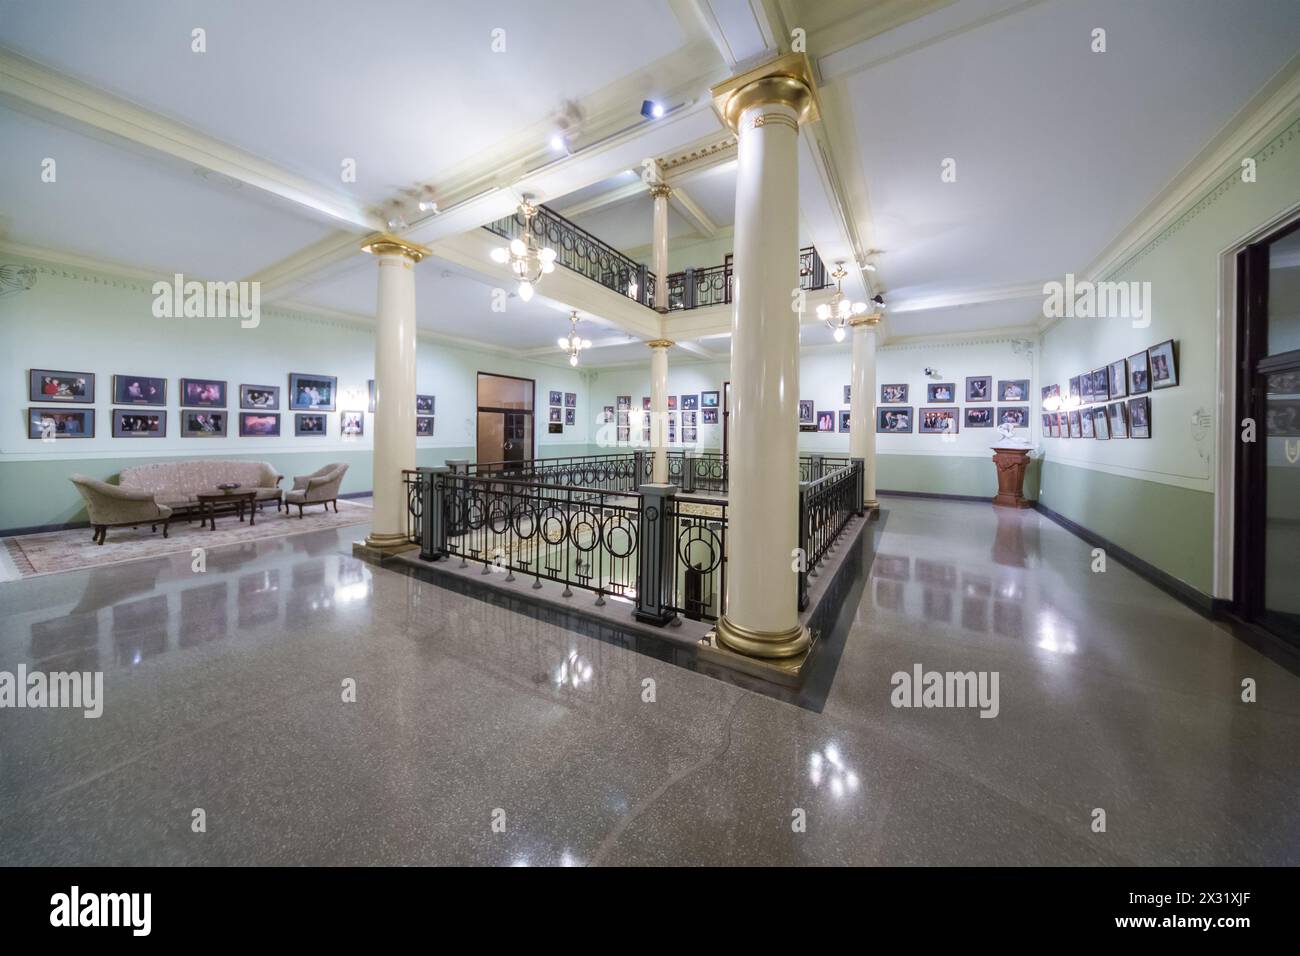 MOSCOW - DEC 4: Recreation area with paintings on the walls and column at the Metropol Hotel on December 4, 2012 in Moscow, Russia. Stock Photo